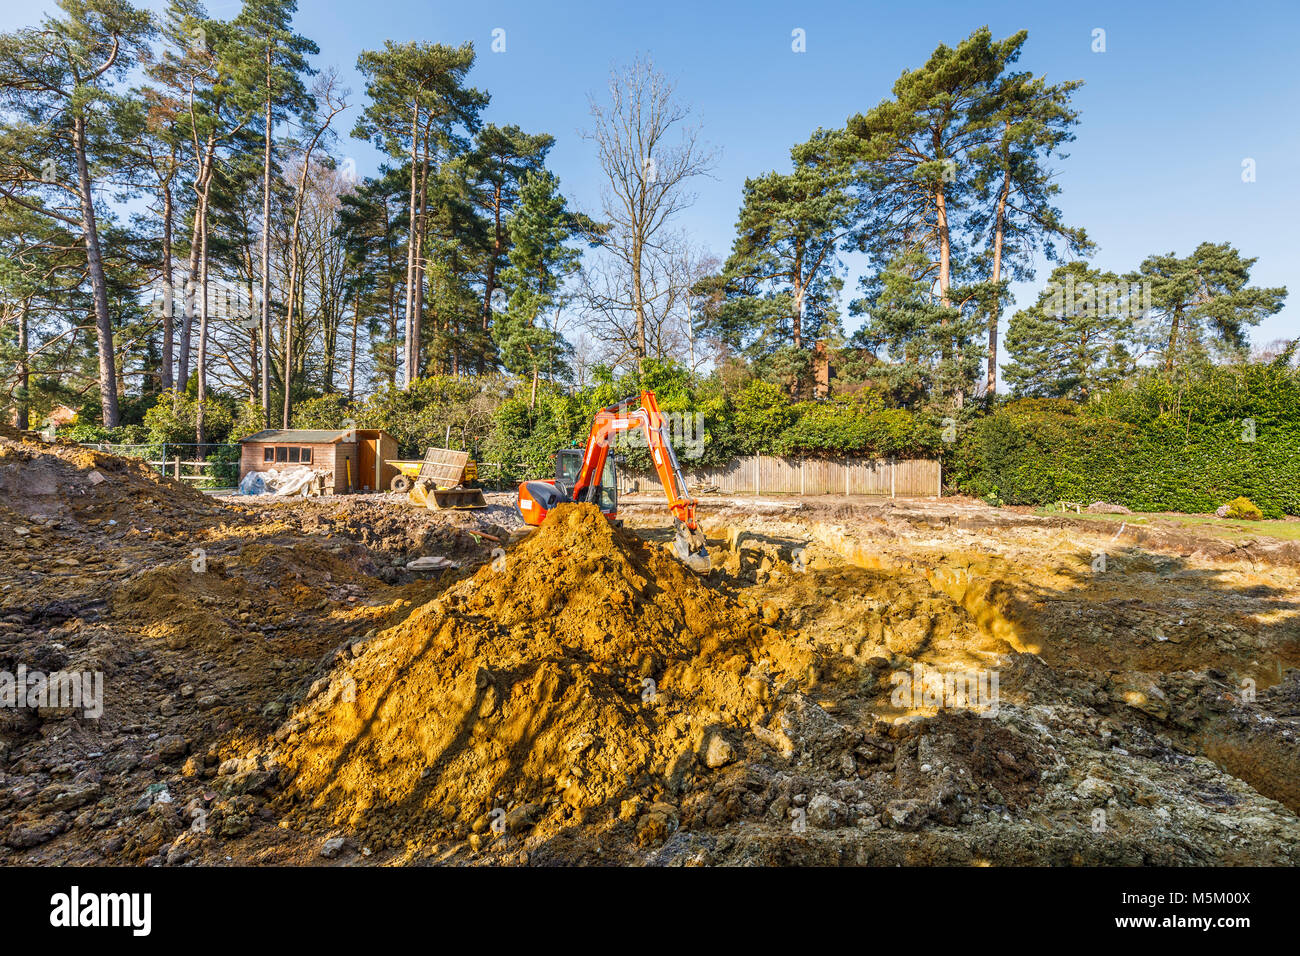 Large orange heavy plant mechanical digger parked on a construction site after digging excavations for foundations of a new residential development Stock Photo